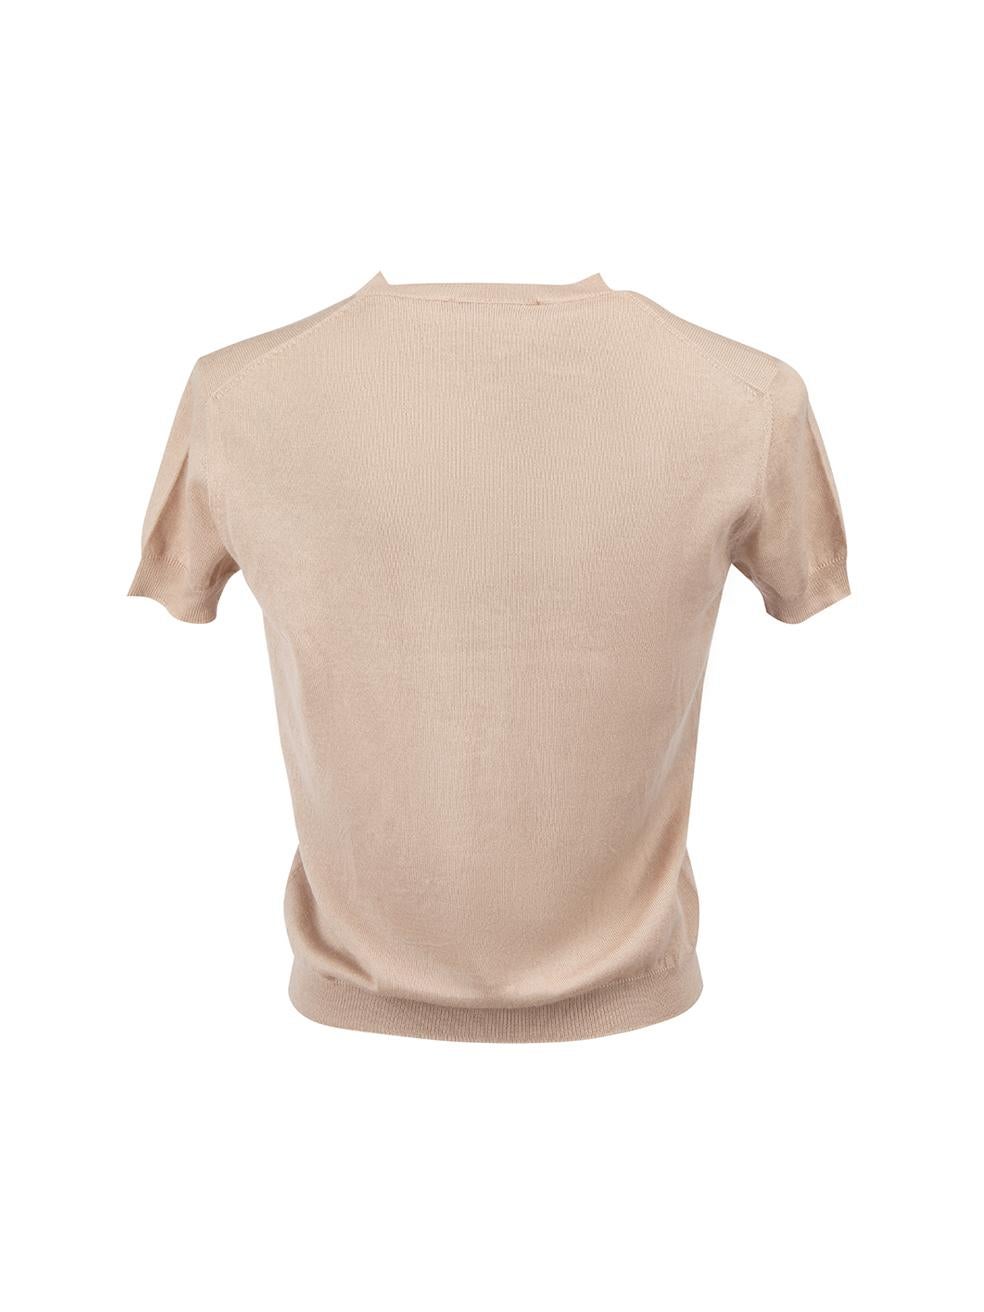 Dior Beige Cashmere Embroidered Knit Top Size XS In Good Condition For Sale In London, GB